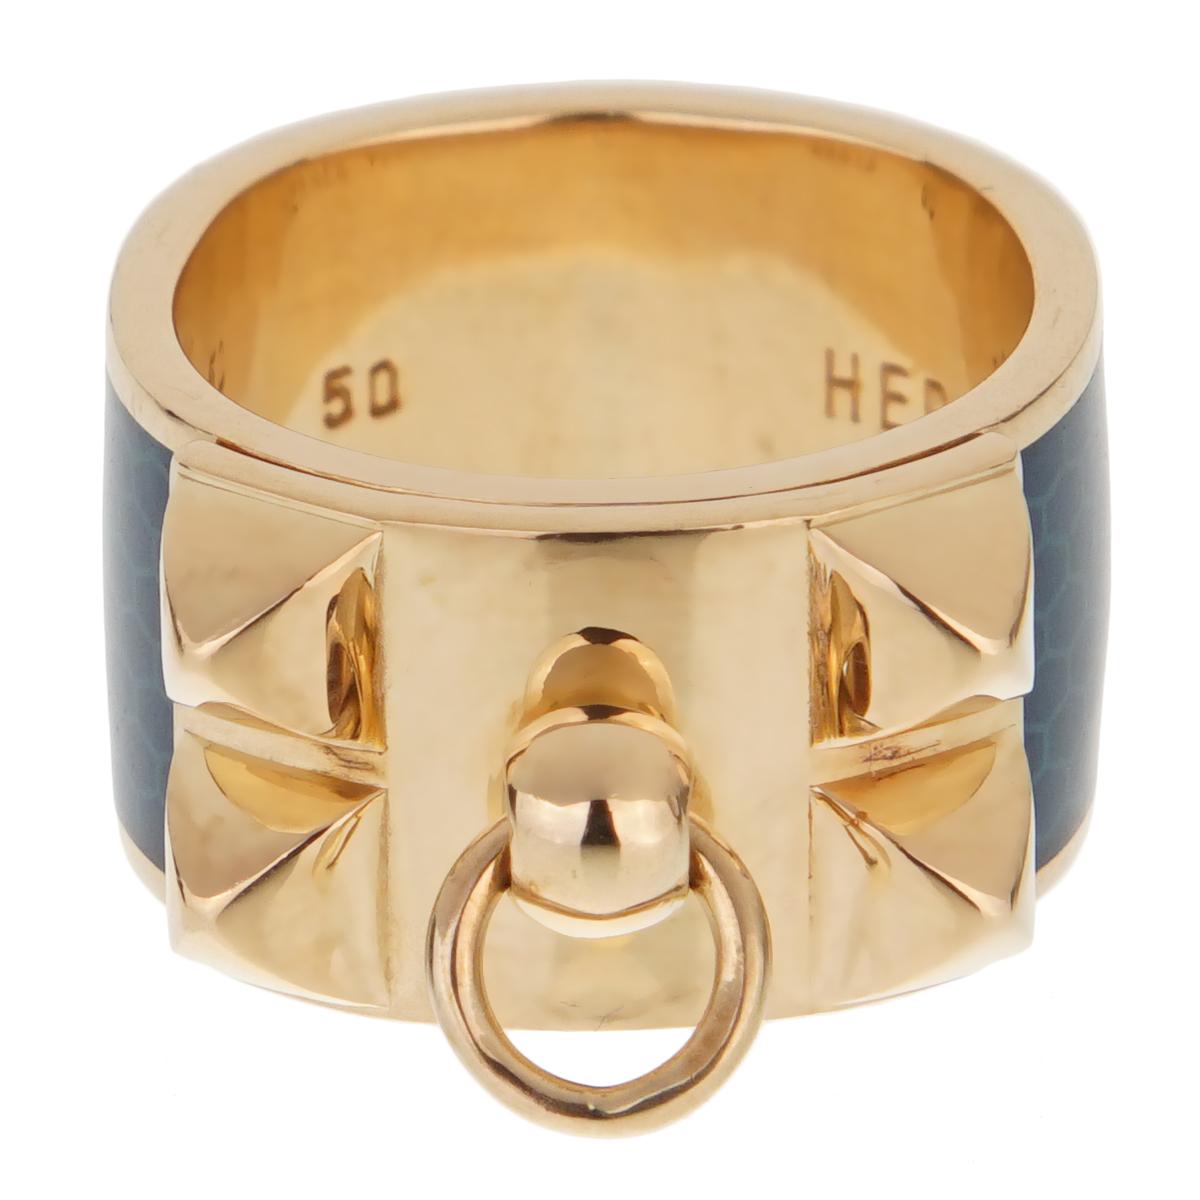 A fabulous Hermes ring from the iconic Collier De Chien collection. Crafted in 18k yellow gold, this stylish wide band (.43